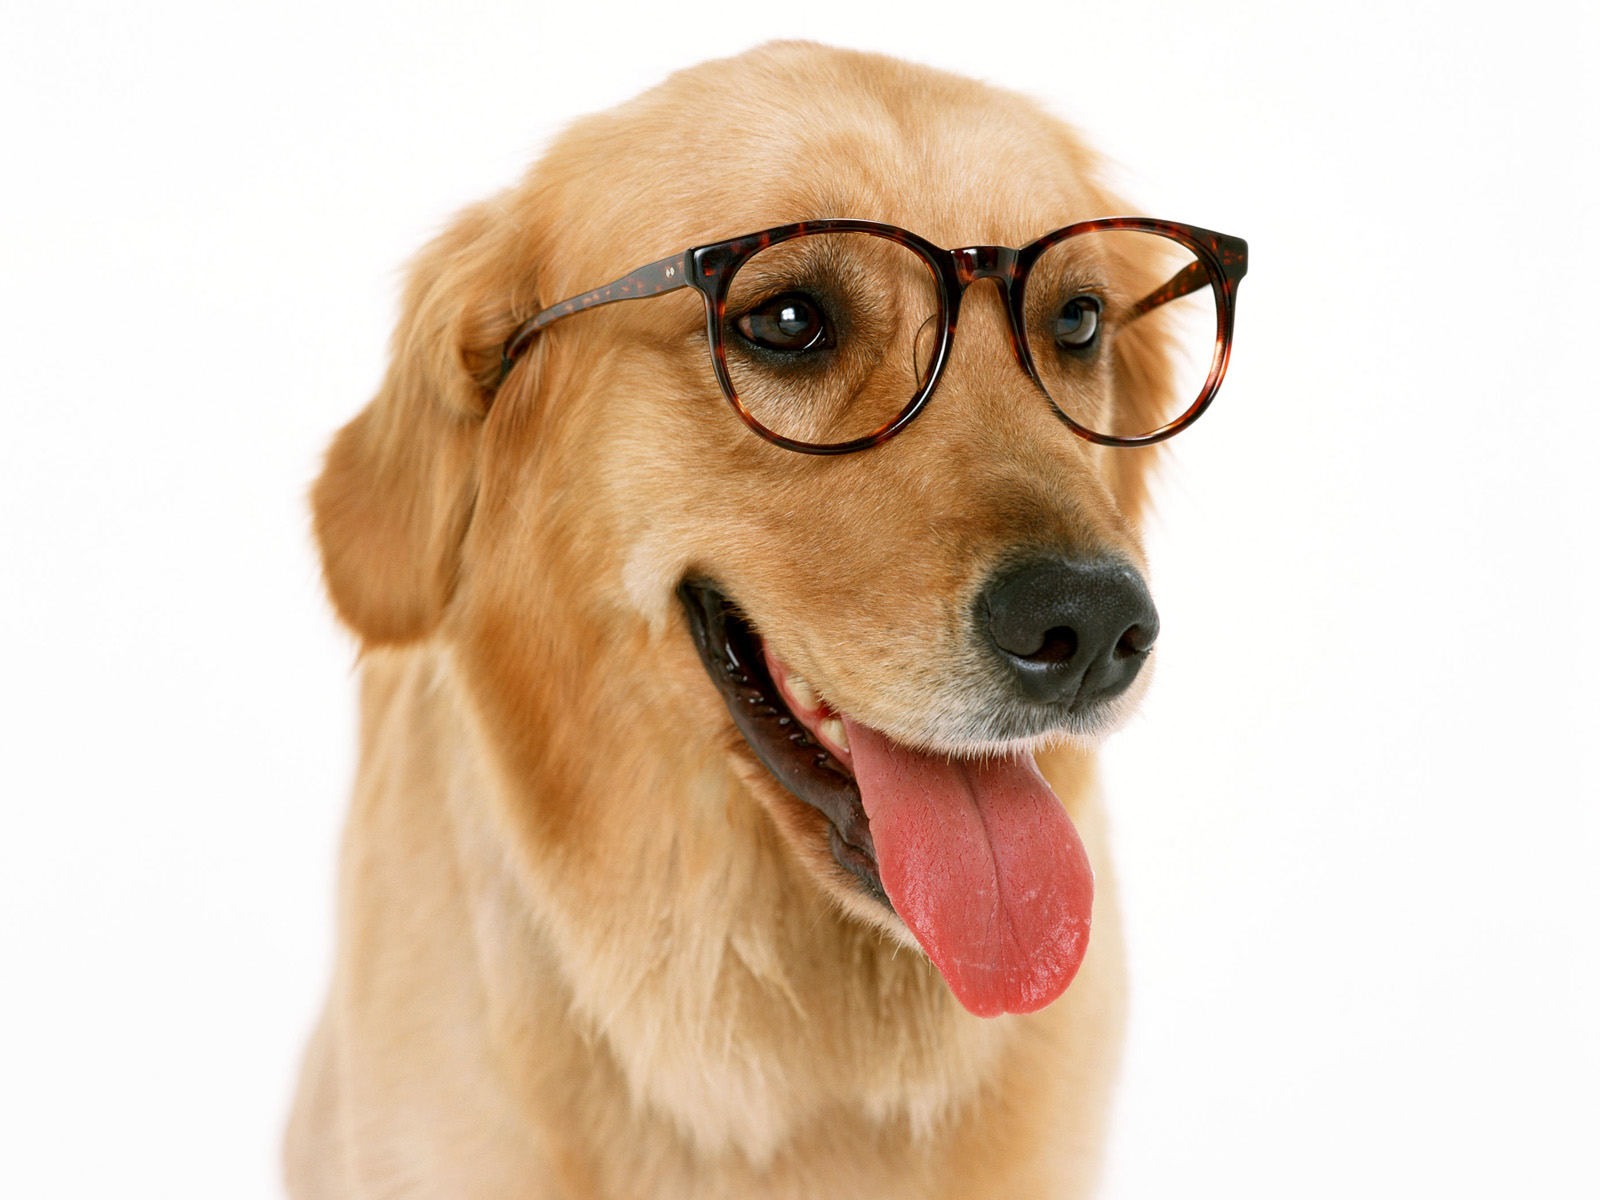 Wearing Glasses Dog Wallpaper And Image Pictures